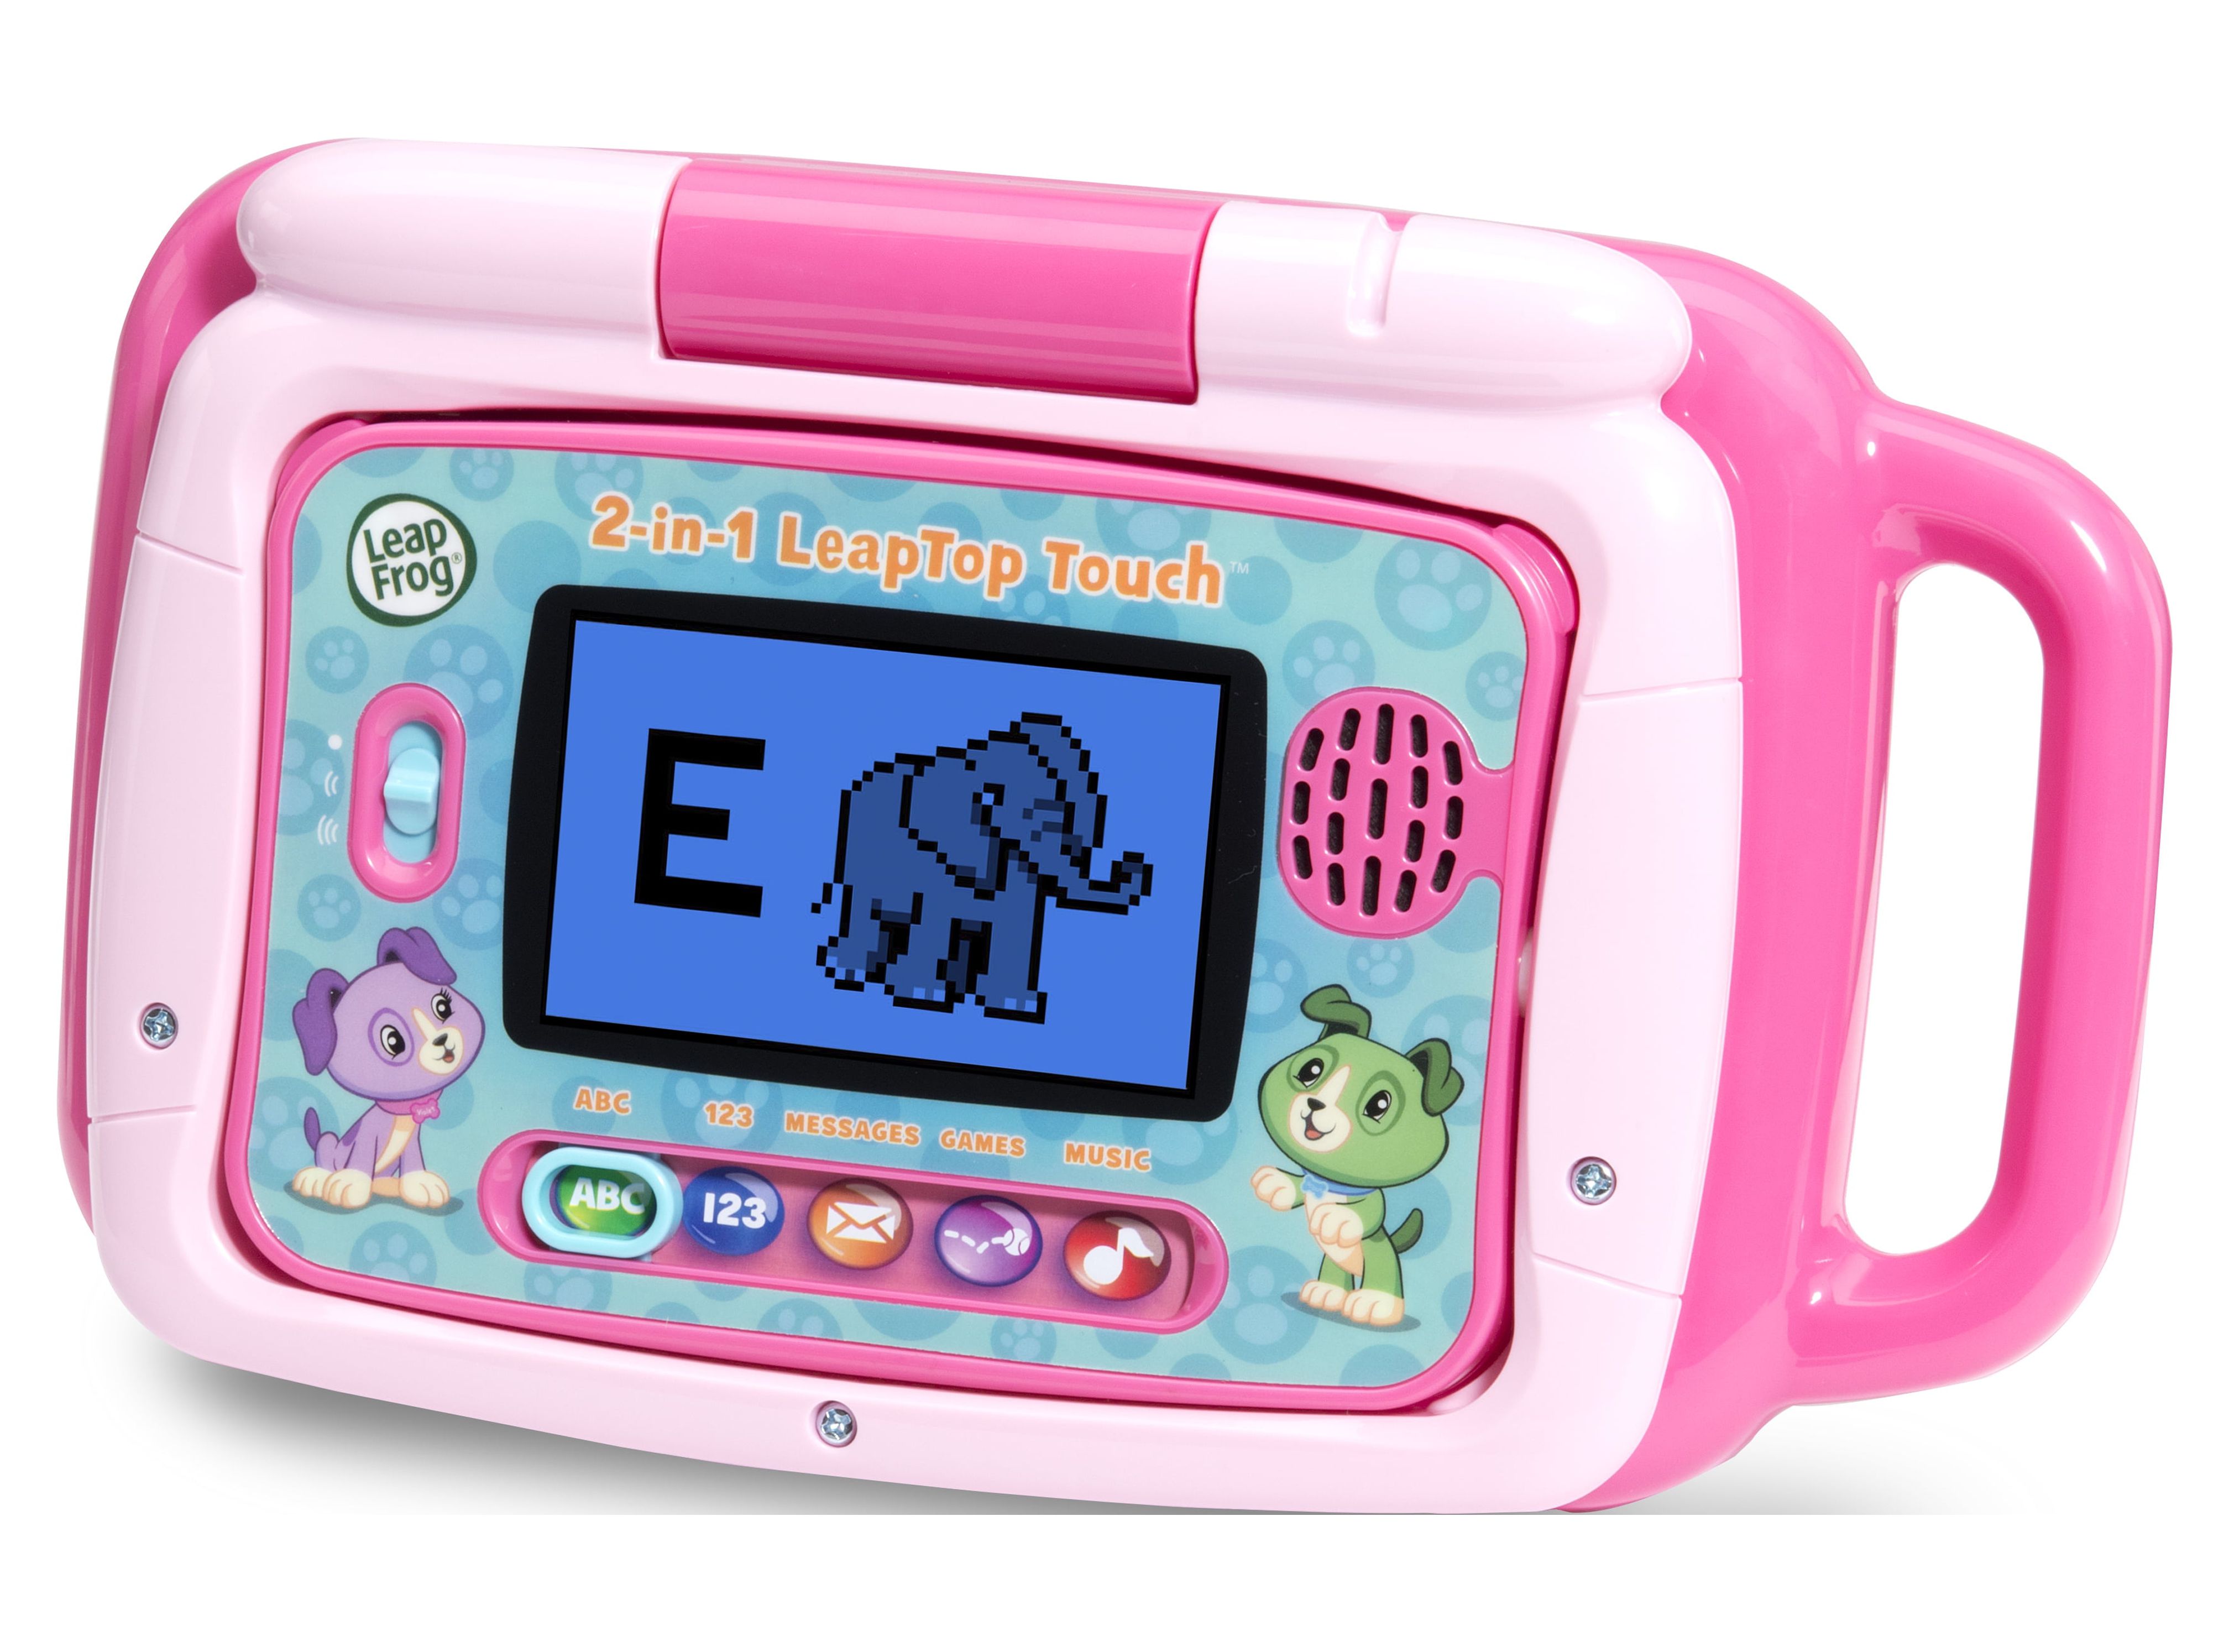 LeapFrog 2-in-1 LeapTop Touch for Toddlers, Electronic Learning System, Teaches Letters, Numbers - image 9 of 12